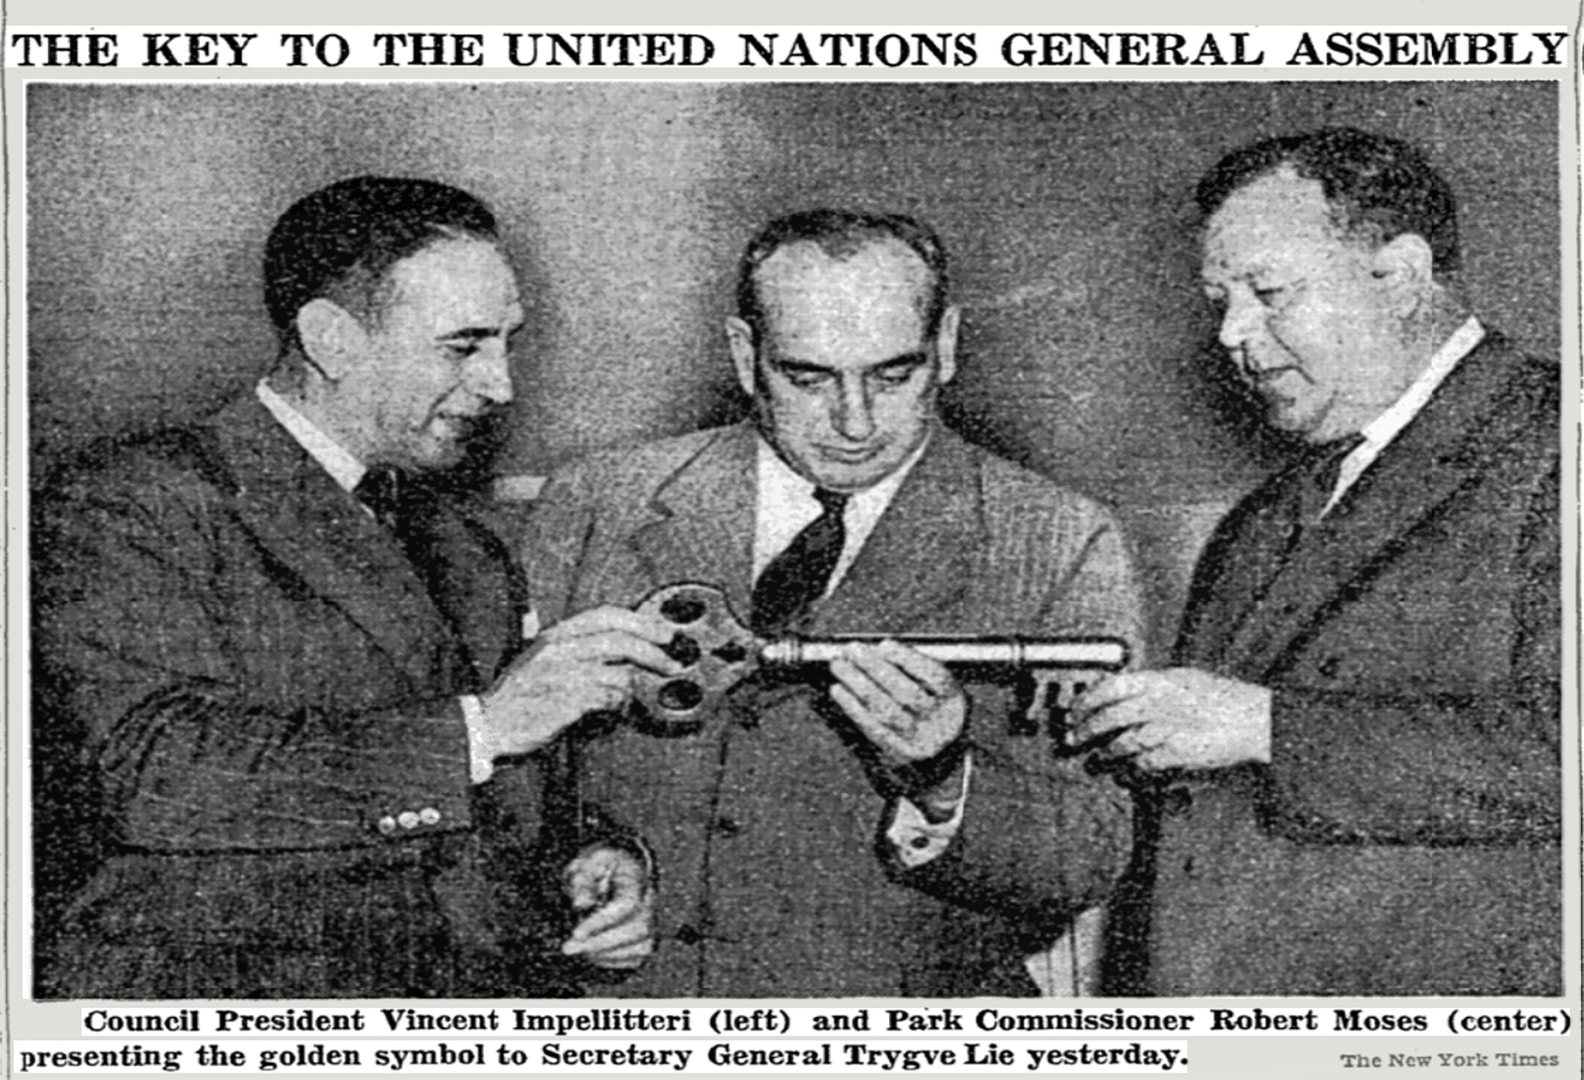 Image of Council President and Acting New York City Mayor Vincent Impellitteri and Park Commissioner Robert Moses presenting a golden key to Secretary-General Trygve Lie